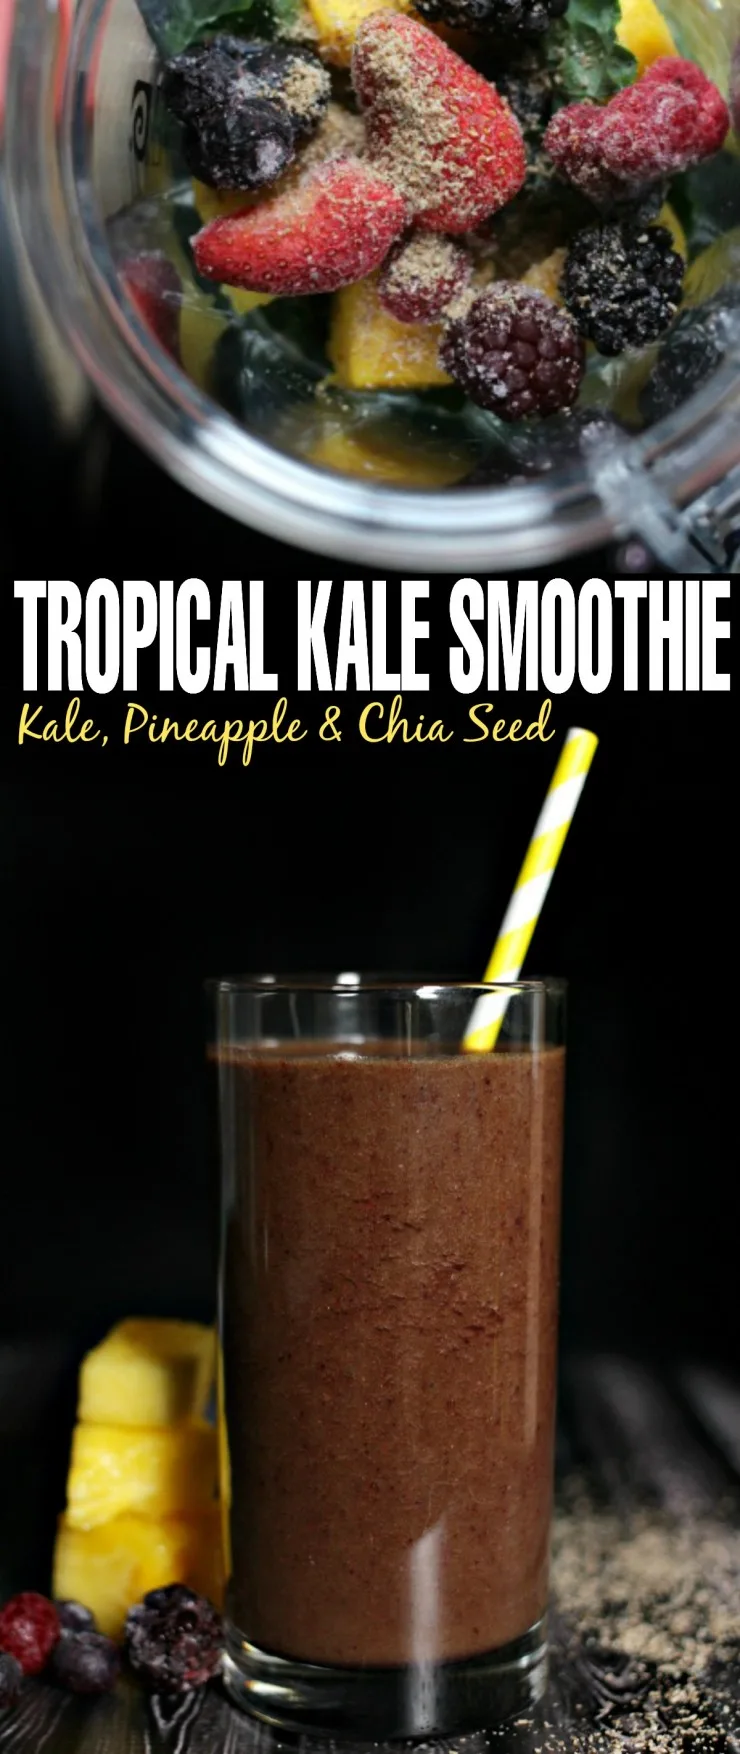 This Kale, Pineapple & Chia Seed Smoothie is a perfect summer beverage for breakfast or just a snack.  It's an amazing tropical kale smoothie without that icky green flavour!